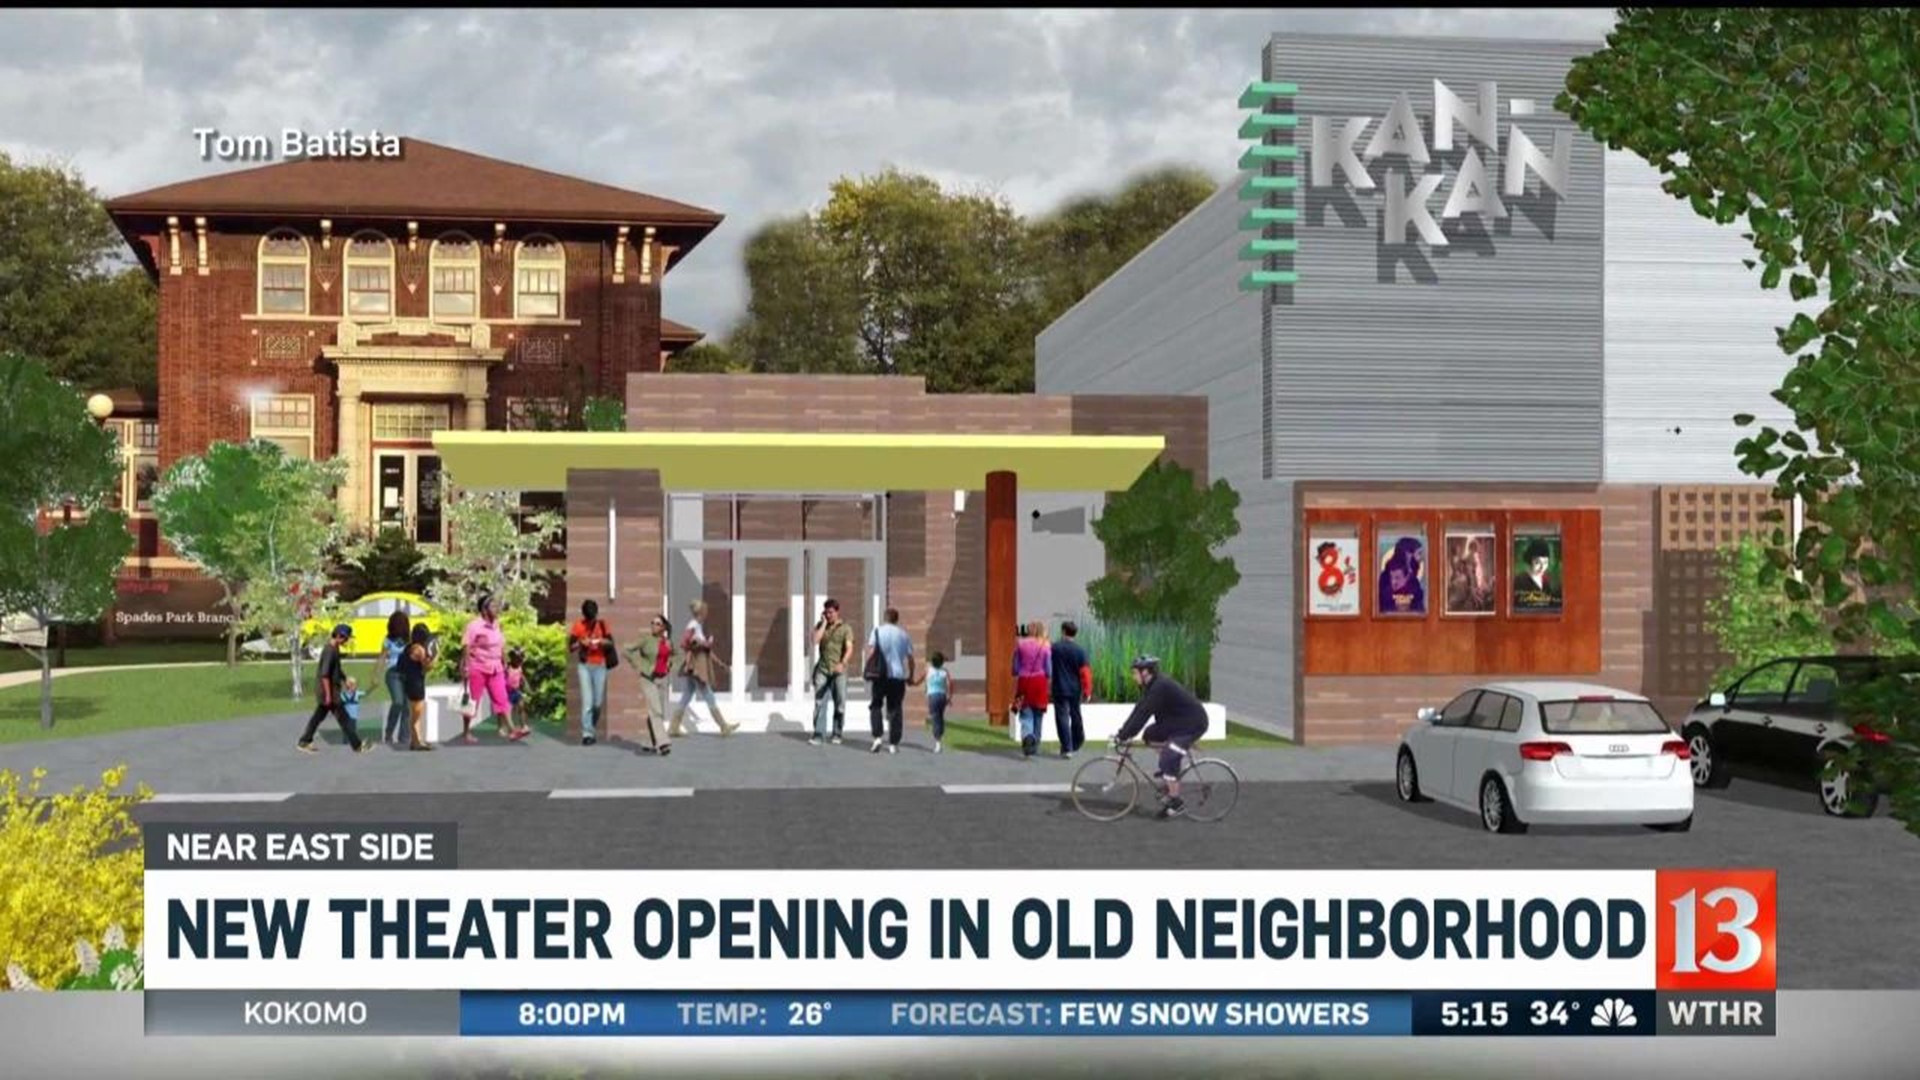 New theater opening in old neighborhood